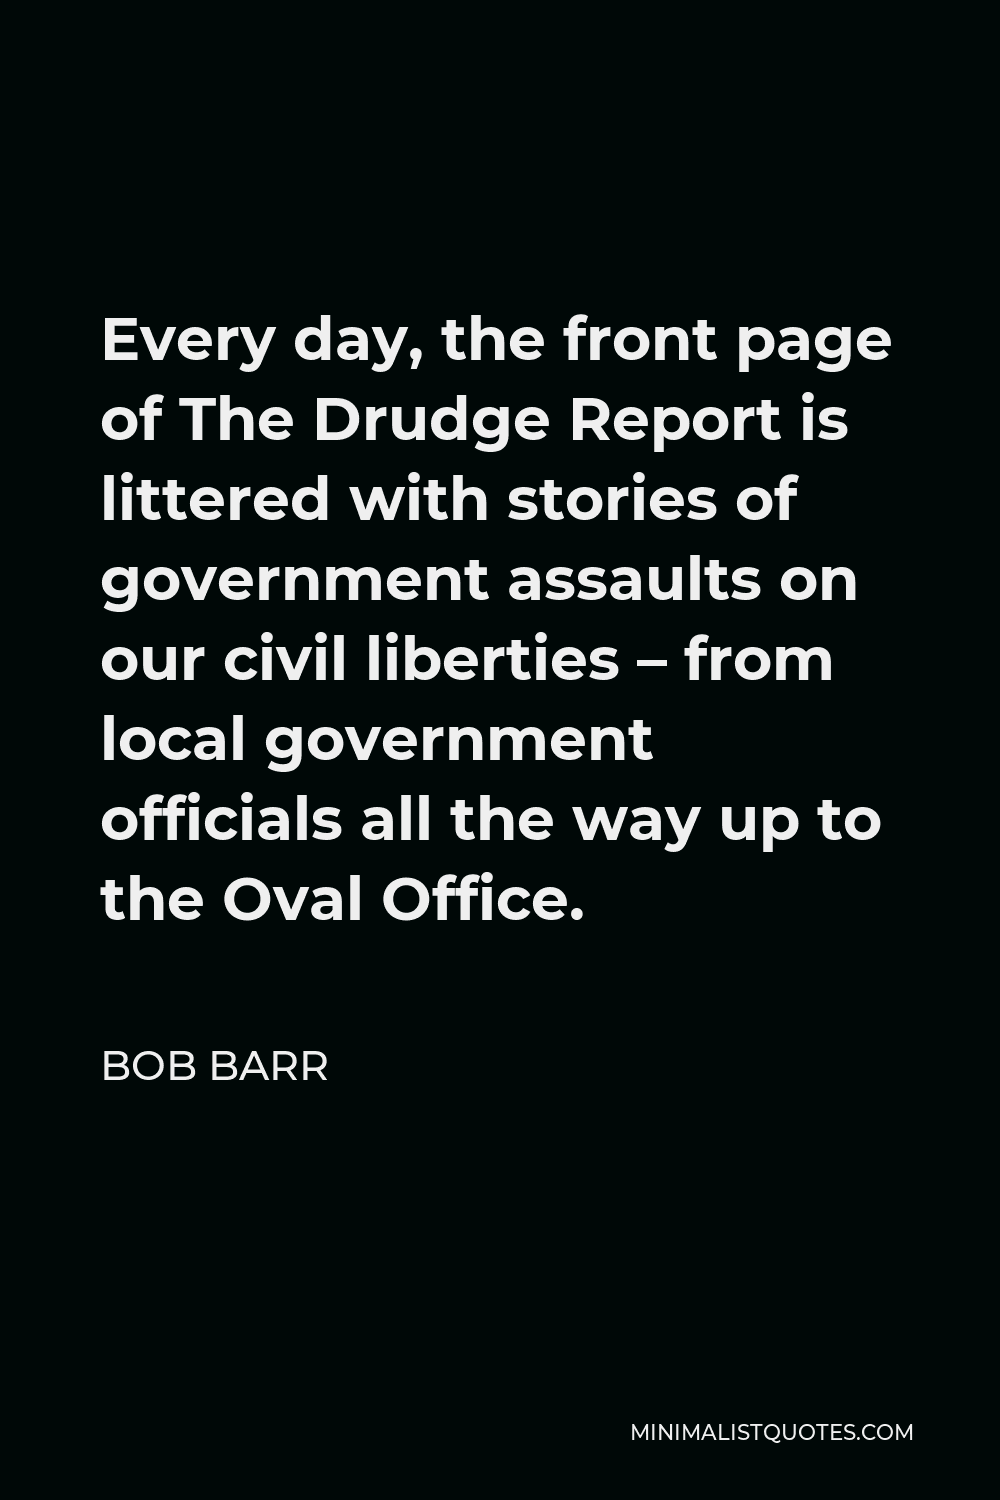 Bob Barr Quote - Every day, the front page of The Drudge Report is littered with stories of government assaults on our civil liberties – from local government officials all the way up to the Oval Office.